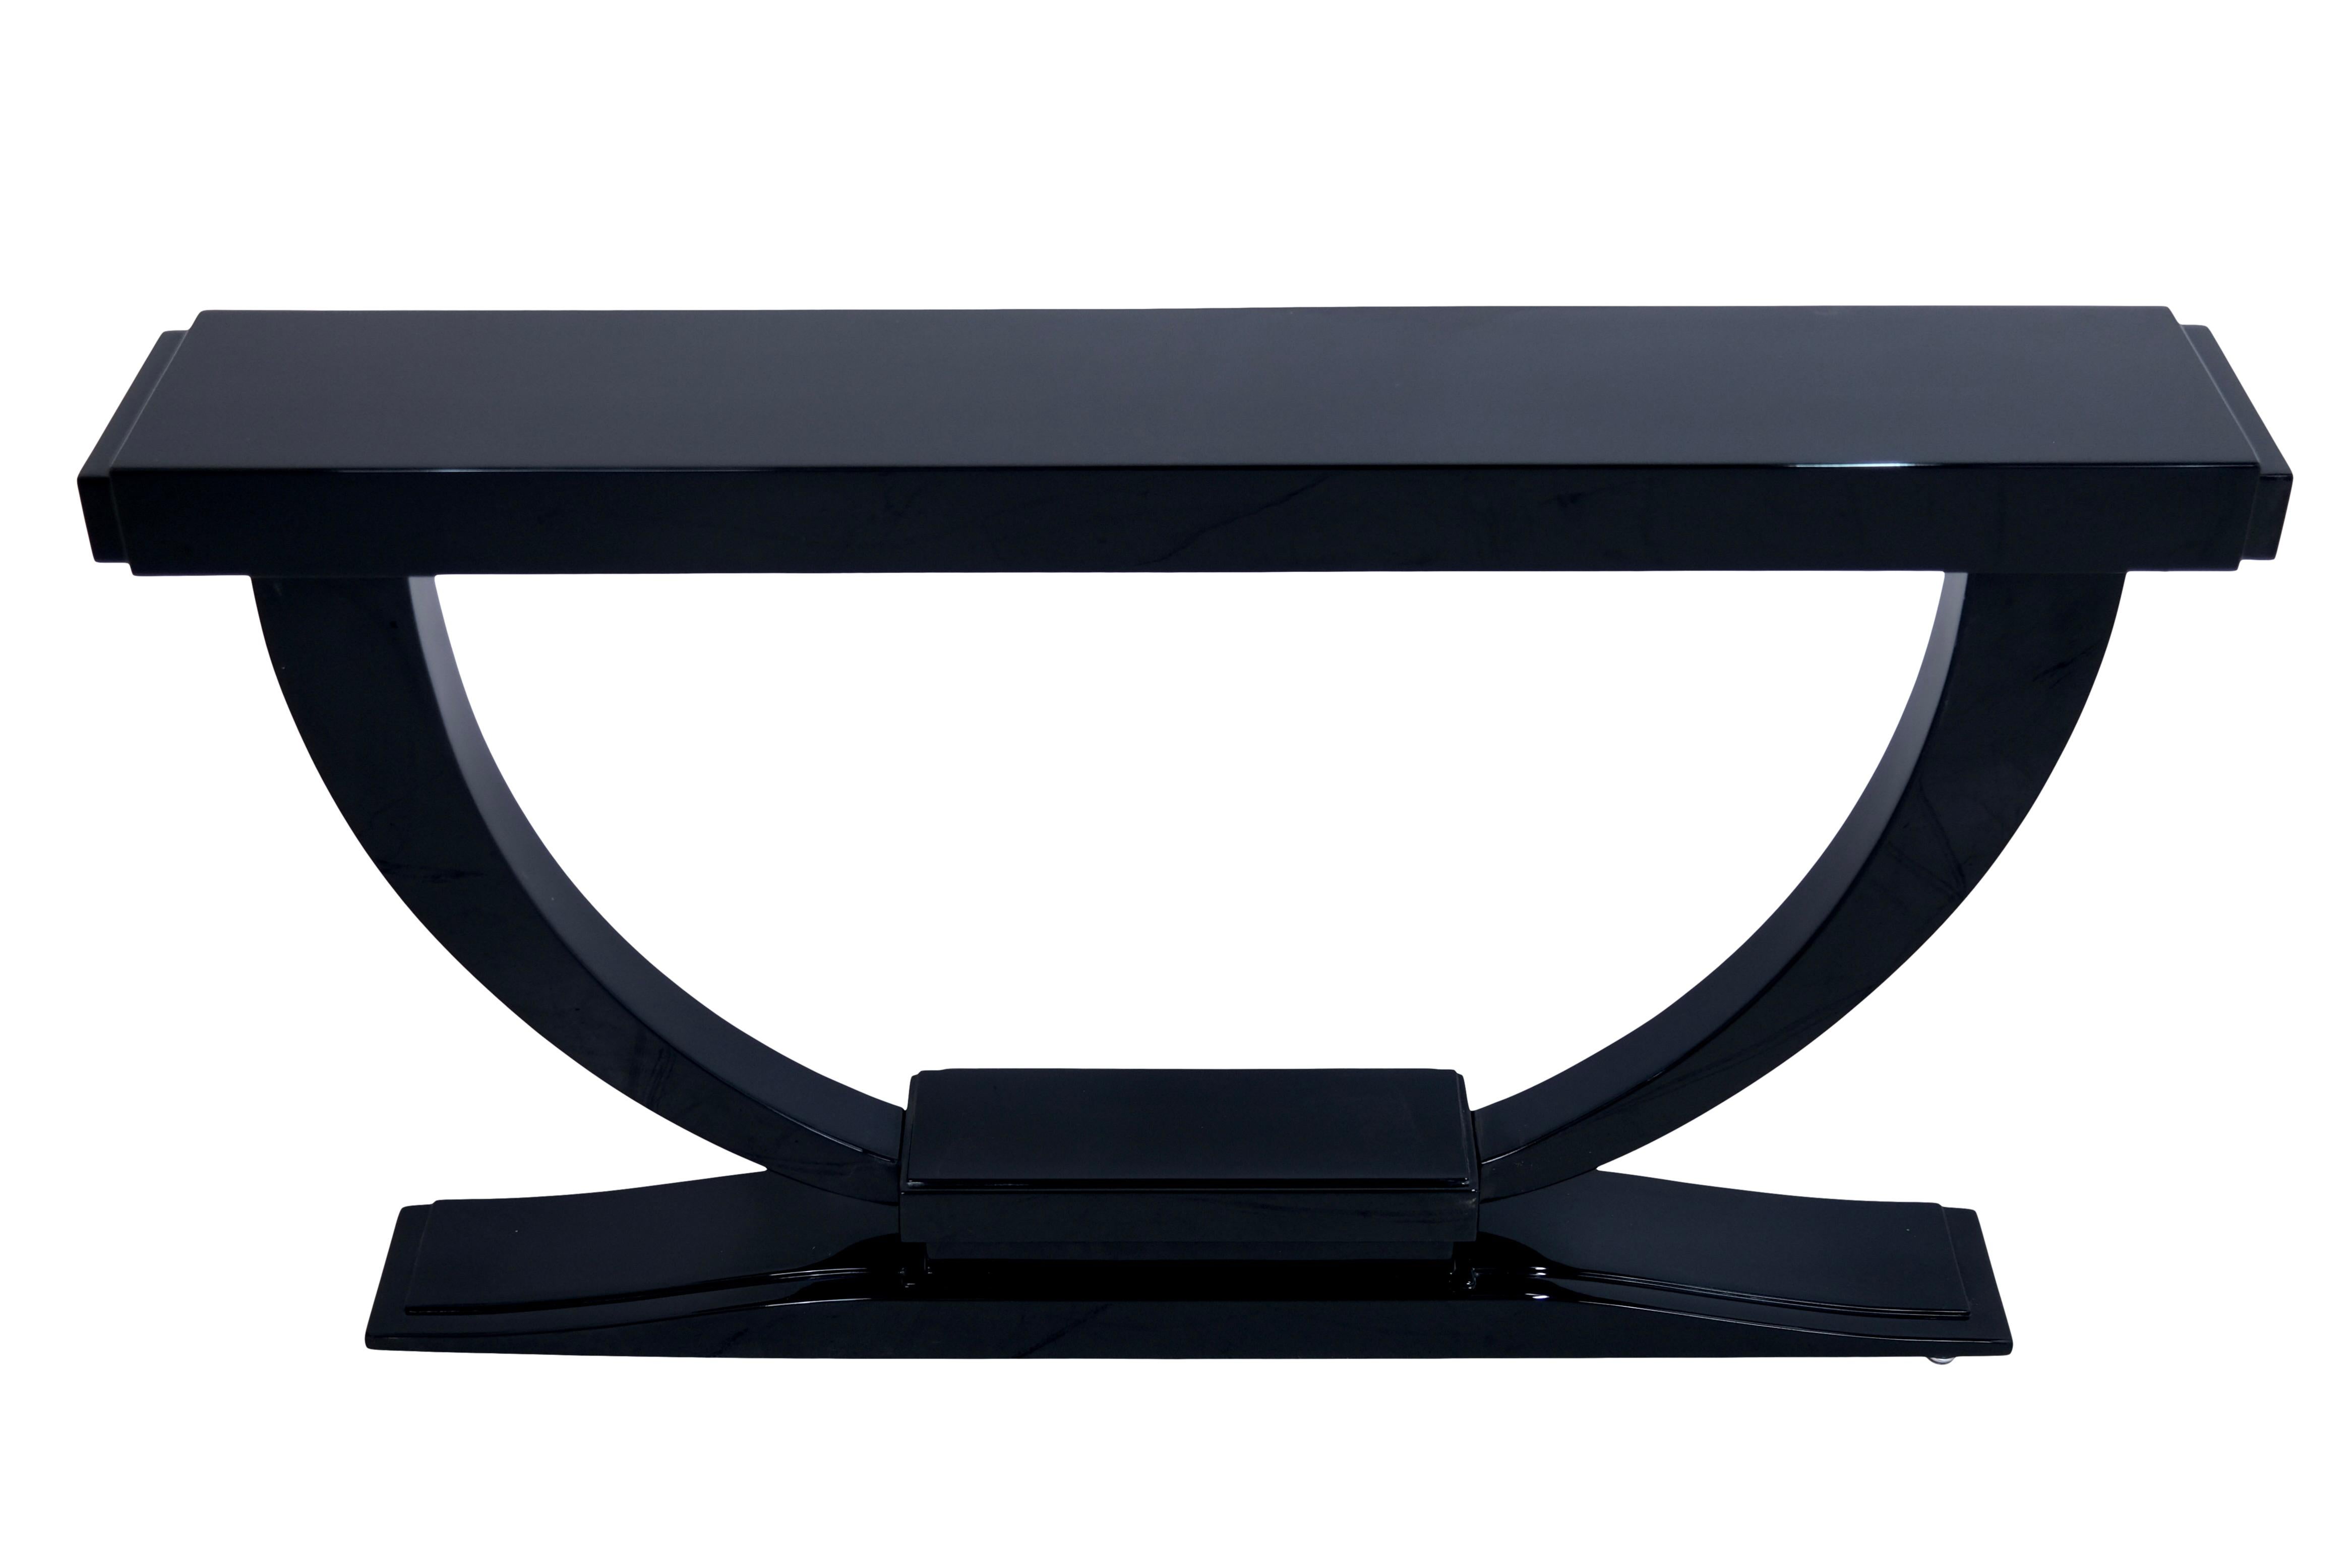 Console table
U-shaped tapered sweep
High gloss black piano lacquer
Can be protected with a glass top black in itself for daily use.

Original Art Deco, France 1930s

Also available as a pair

Dimensions:
Width: 135 cm
Height: 78,5